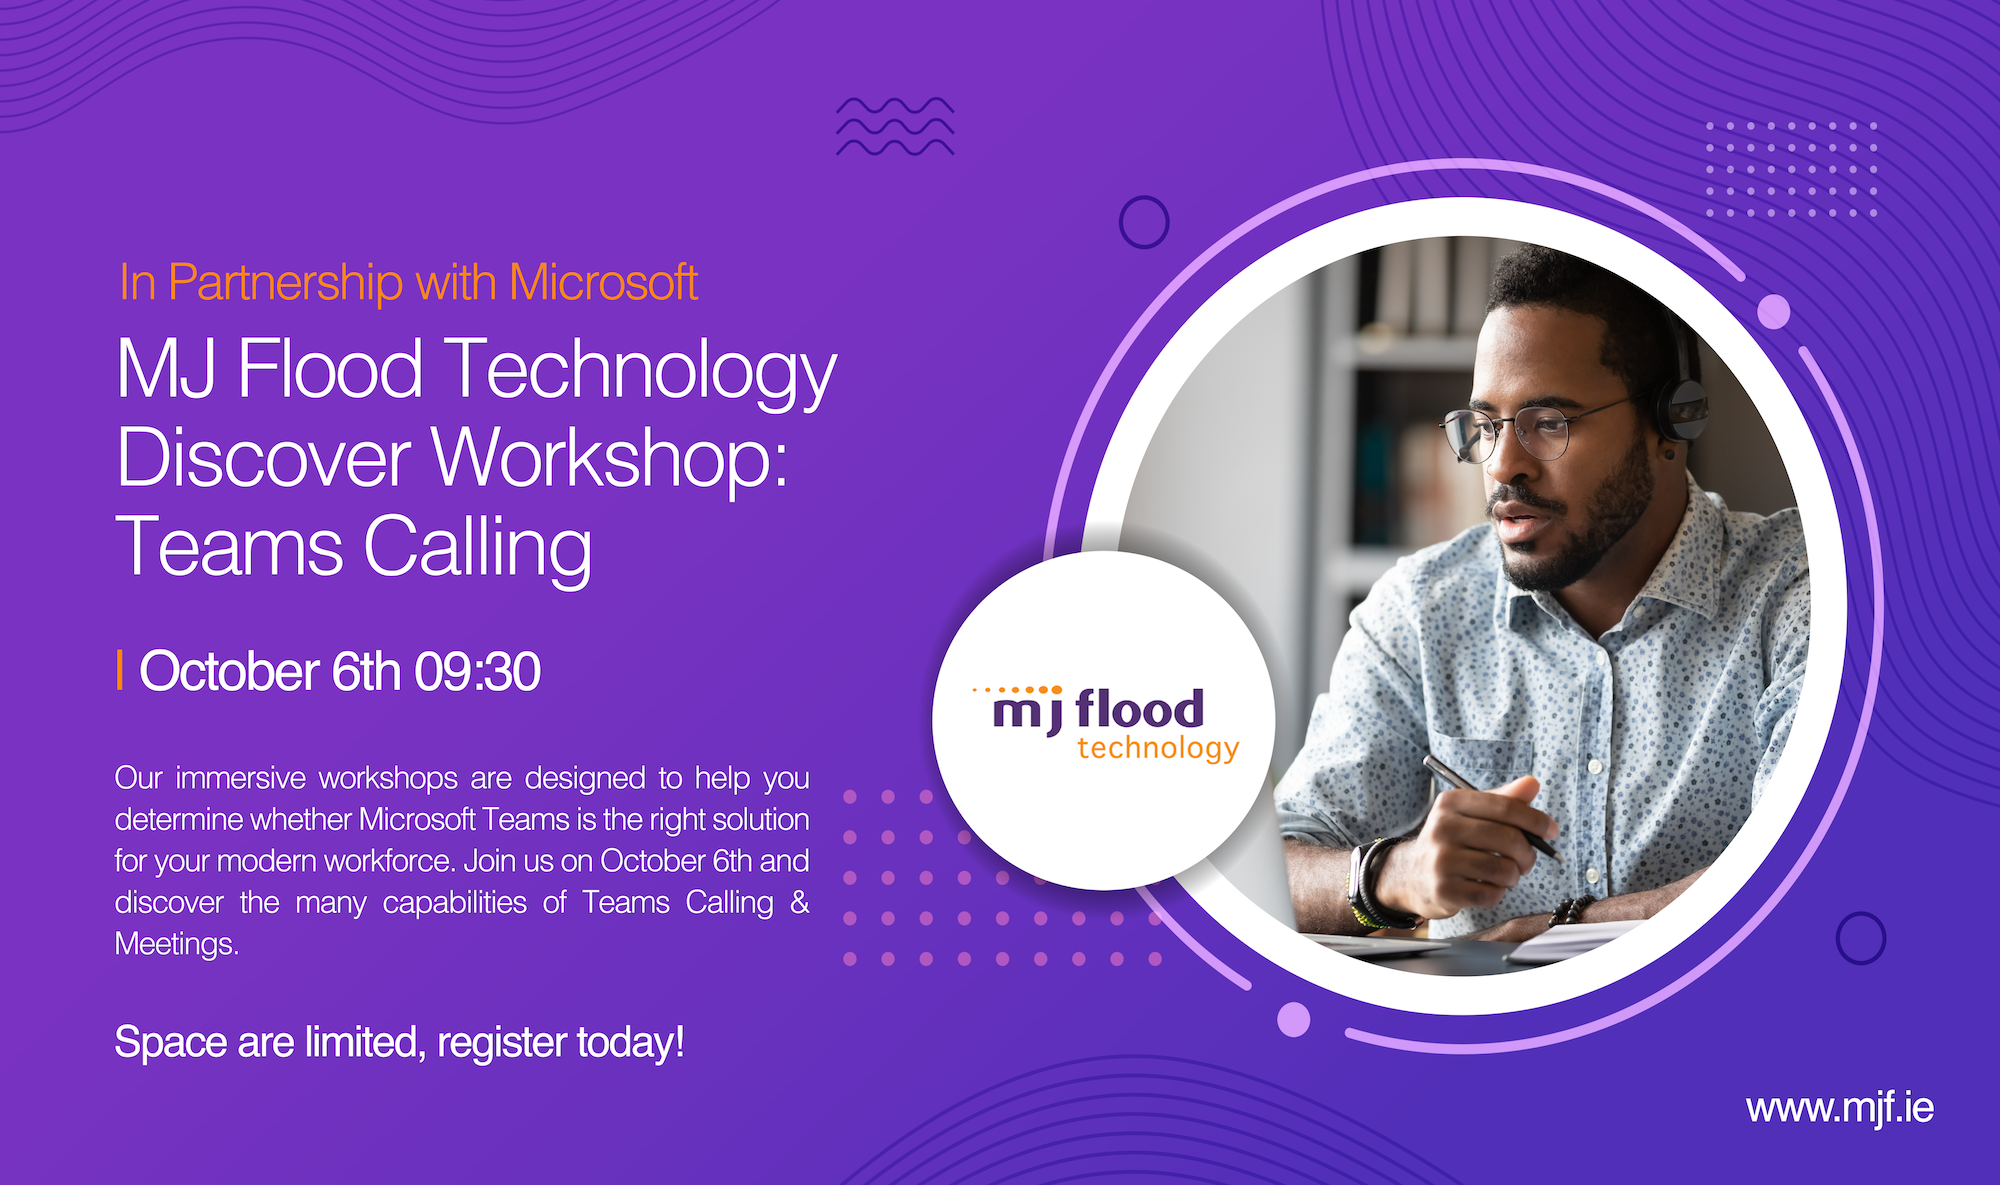 Microsoft Discover Workshop: Teams Calling with MJ Flood Technology